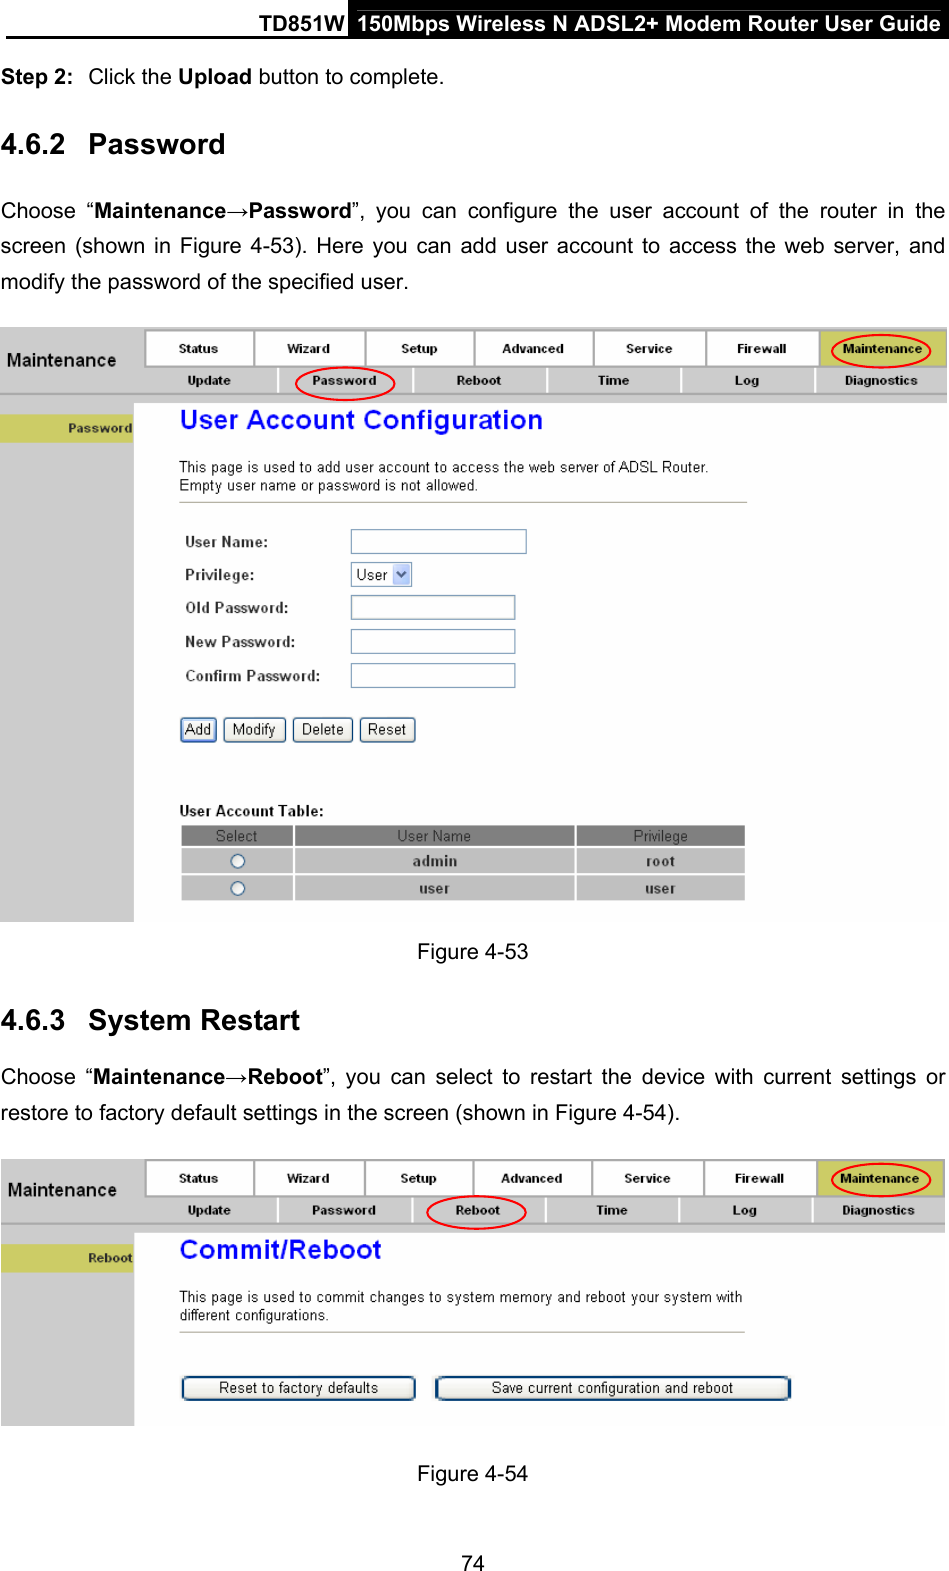 TD851W  150Mbps Wireless N ADSL2+ Modem Router User Guide Step 2:  Click the Upload button to complete. 4.6.2  Password Choose “Maintenance→Password”, you can configure the user account of the router in the screen (shown in Figure 4-53). Here you can add user account to access the web server, and modify the password of the specified user.    Figure 4-53 4.6.3  System Restart Choose “Maintenance→Reboot”, you can select to restart the device with current settings or restore to factory default settings in the screen (shown in Figure 4-54).  Figure 4-54 74 